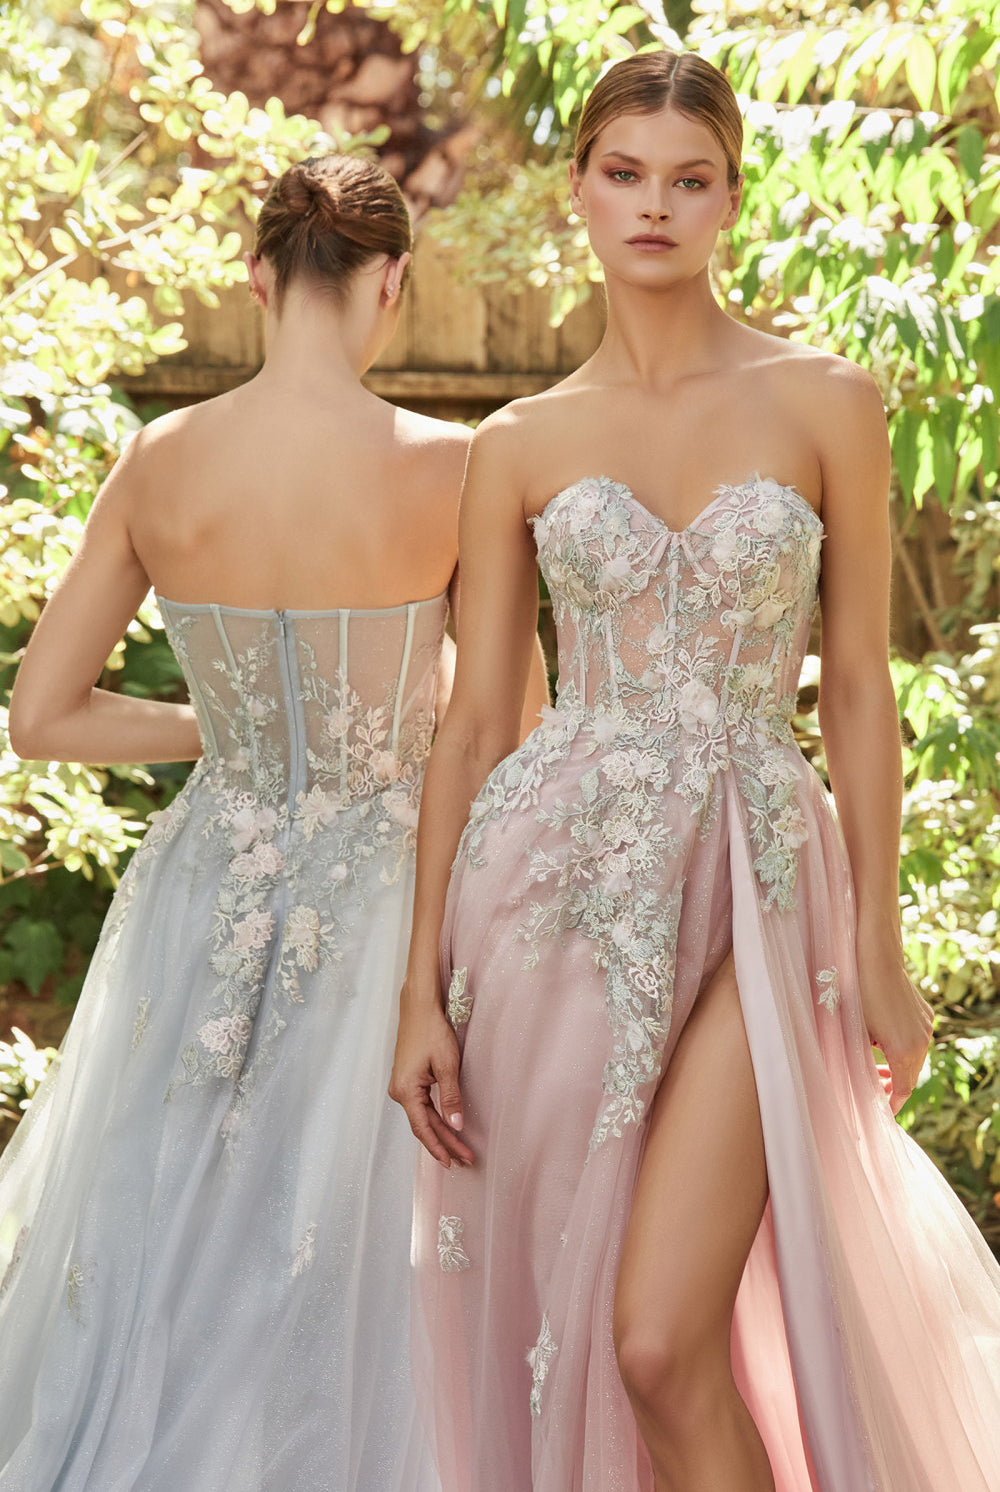 Prom & Bridesmaid Gown w/ Floral Overskirt, Sheer Strapless Bodice & A-Line Formal Dress-smcdress